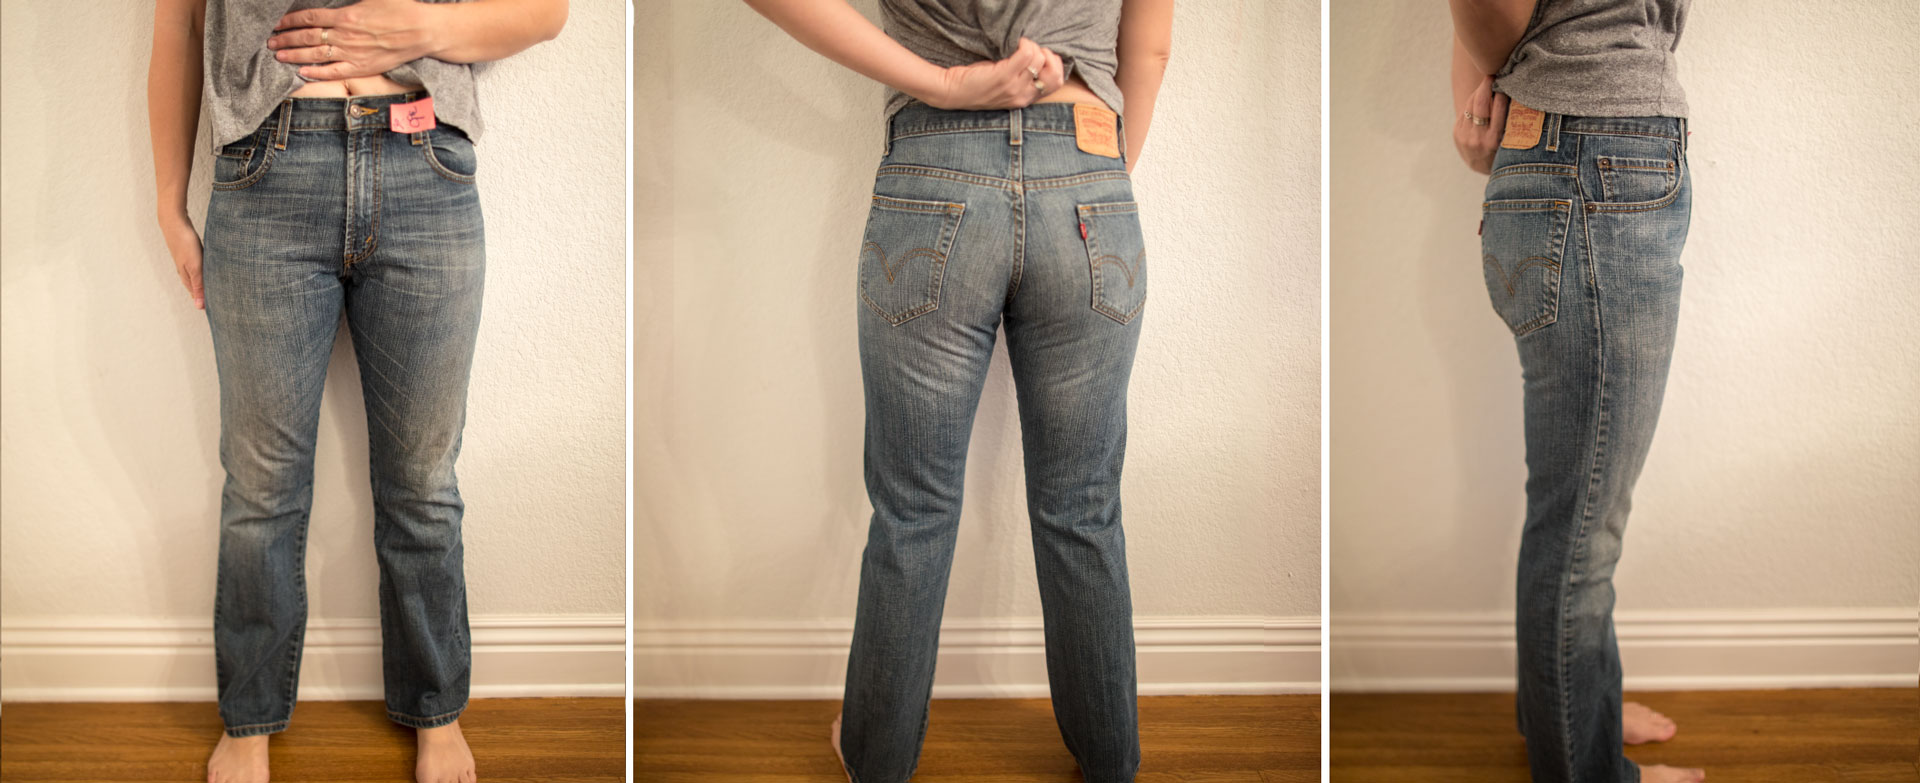 Finding the Right Jeans | Vintage Levi's Fit Guide - THIS MOM'S GONNA SNAP!